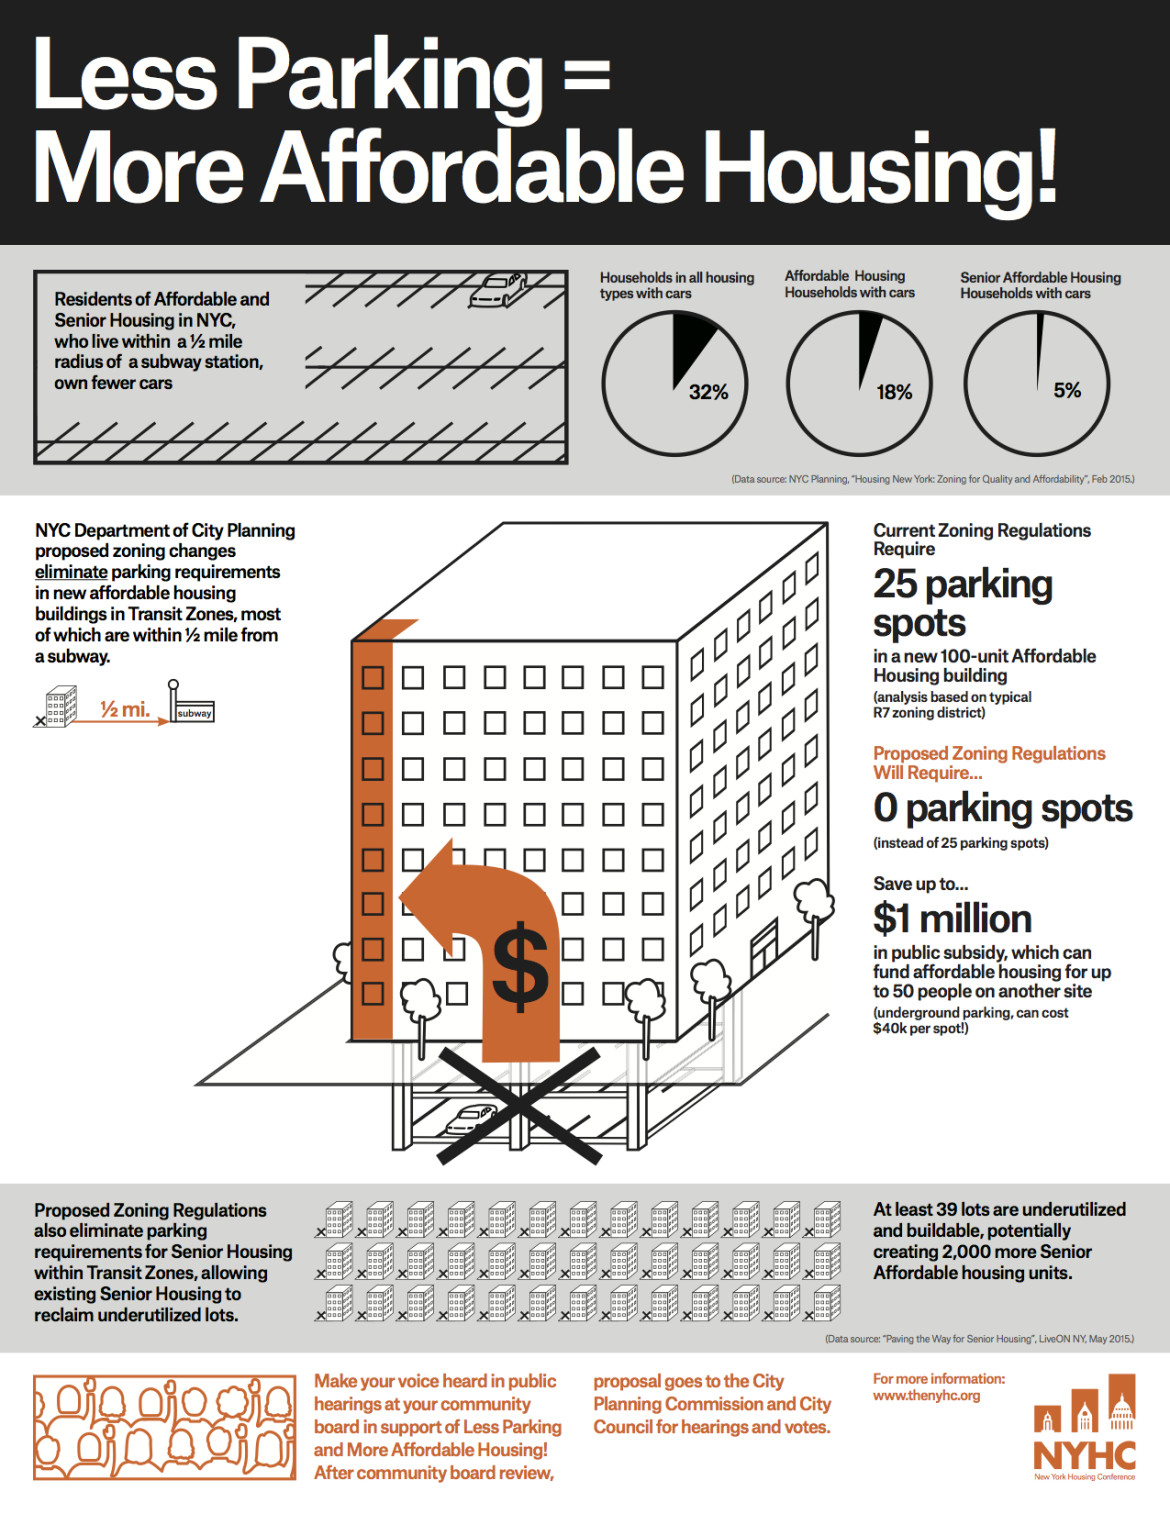 Less Parking=More Affordable Housing 2015 copy